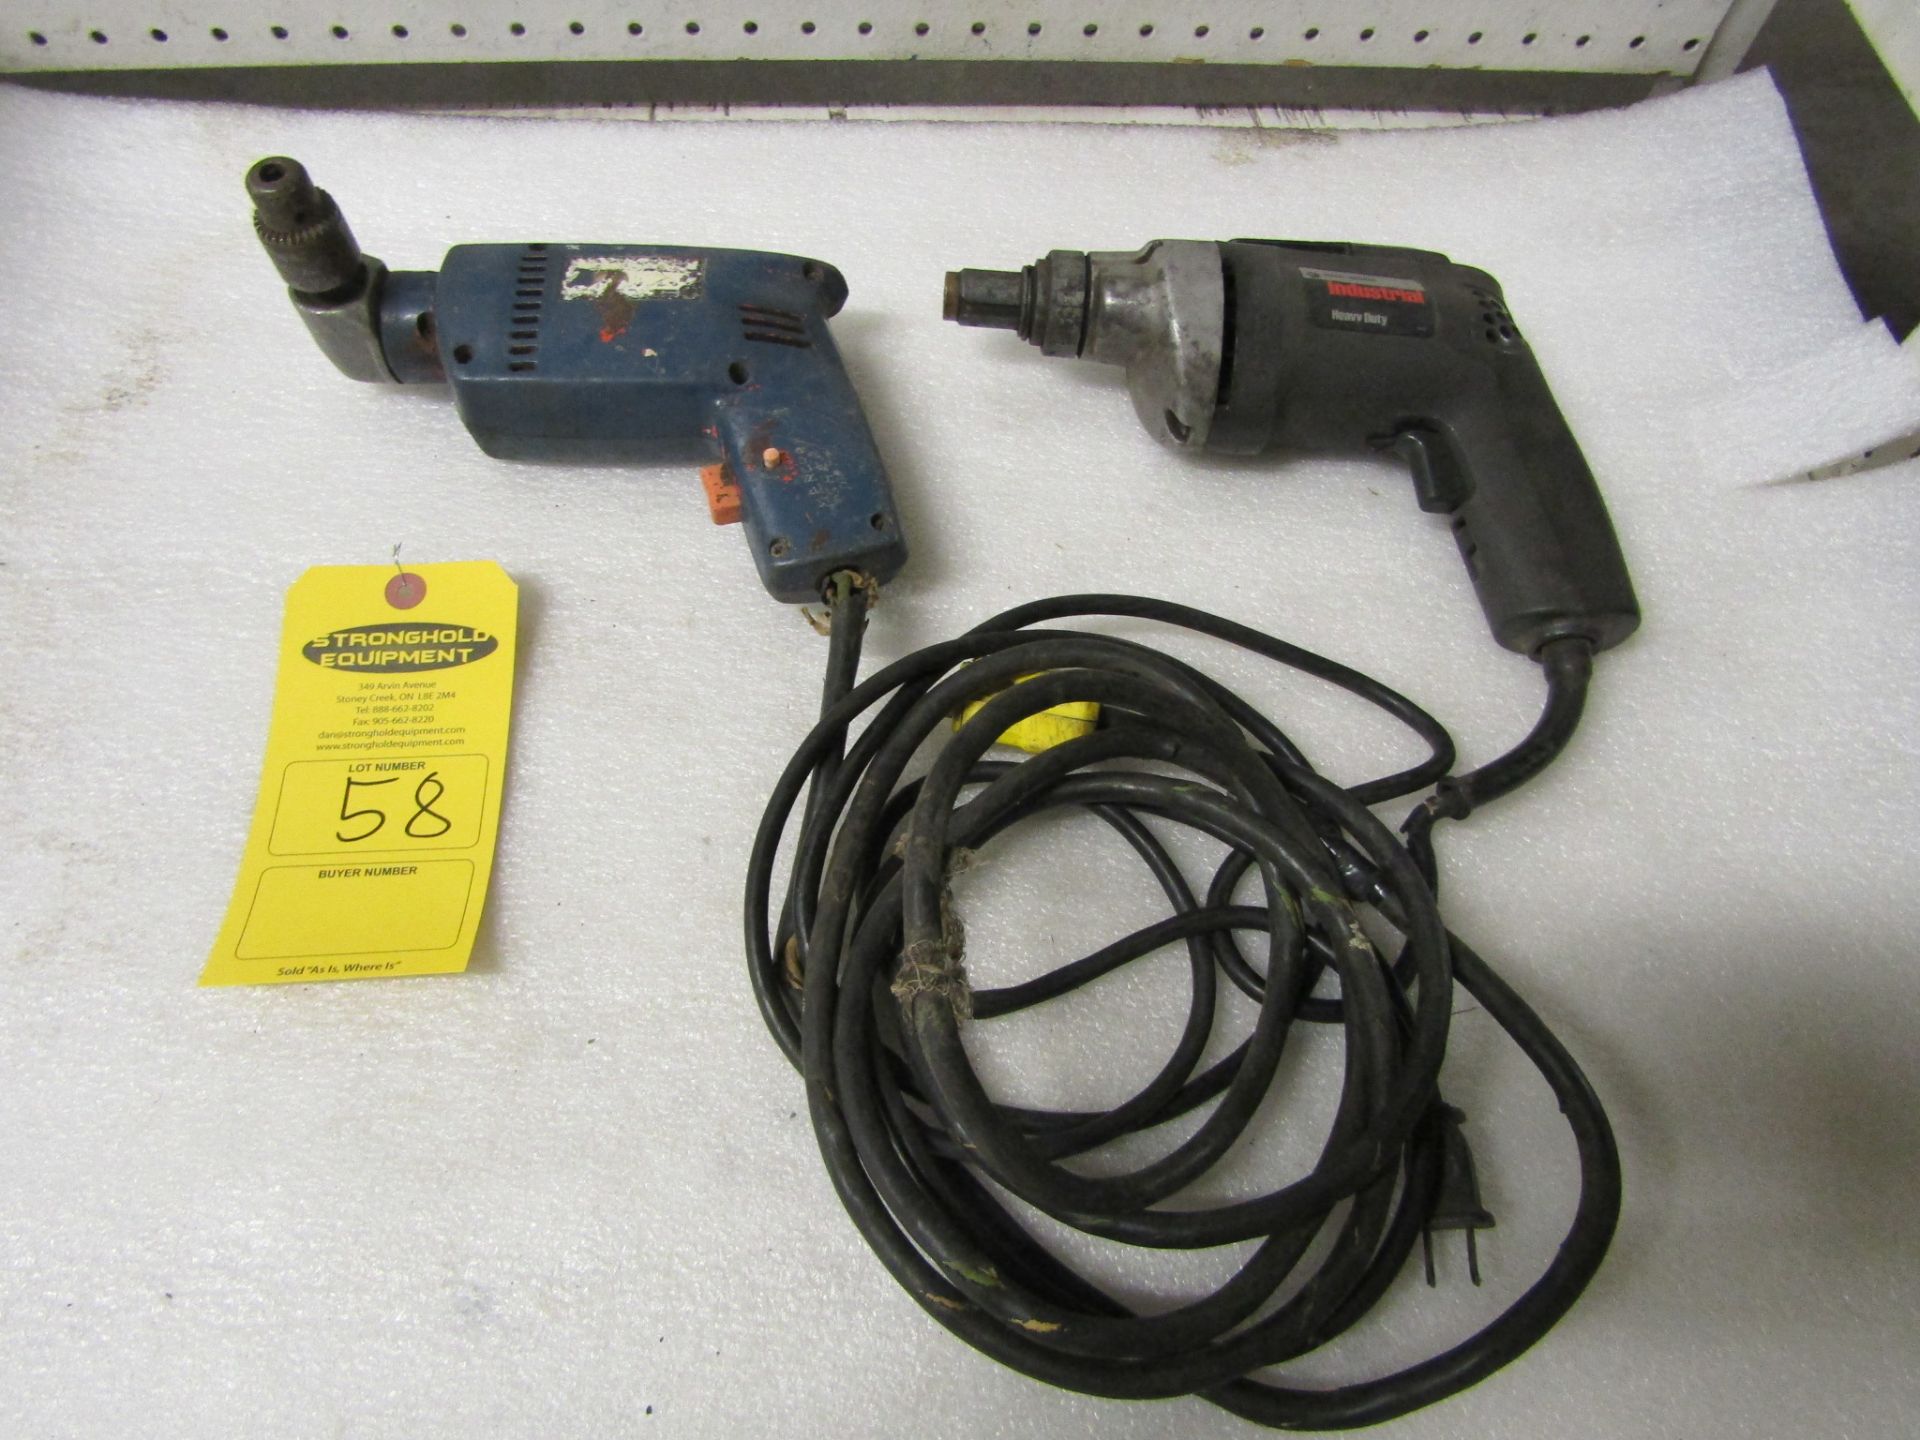 Lot of 2 (2 units) Electric Drills Right Angle Unit and Black and Decker unit